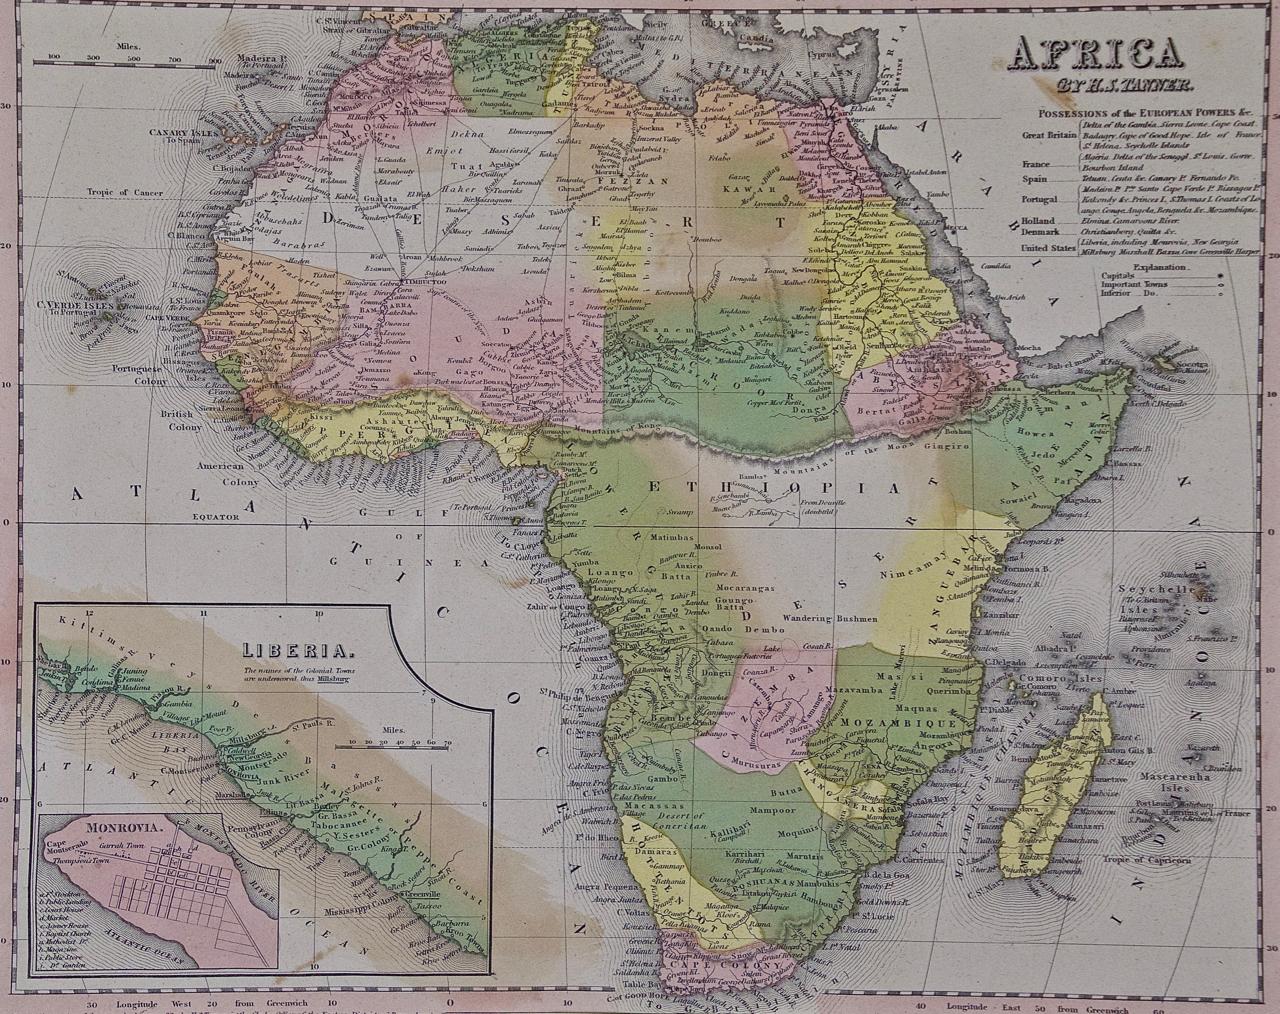 An early to mid-19th century hand-colored map of Africa by Henry Schenk Tanner, published in Tanner's Universal Atlas by Matthew Carey & Son in Philadelphia in 1834. At the time this map was published, Africa was largely unexplored. The 